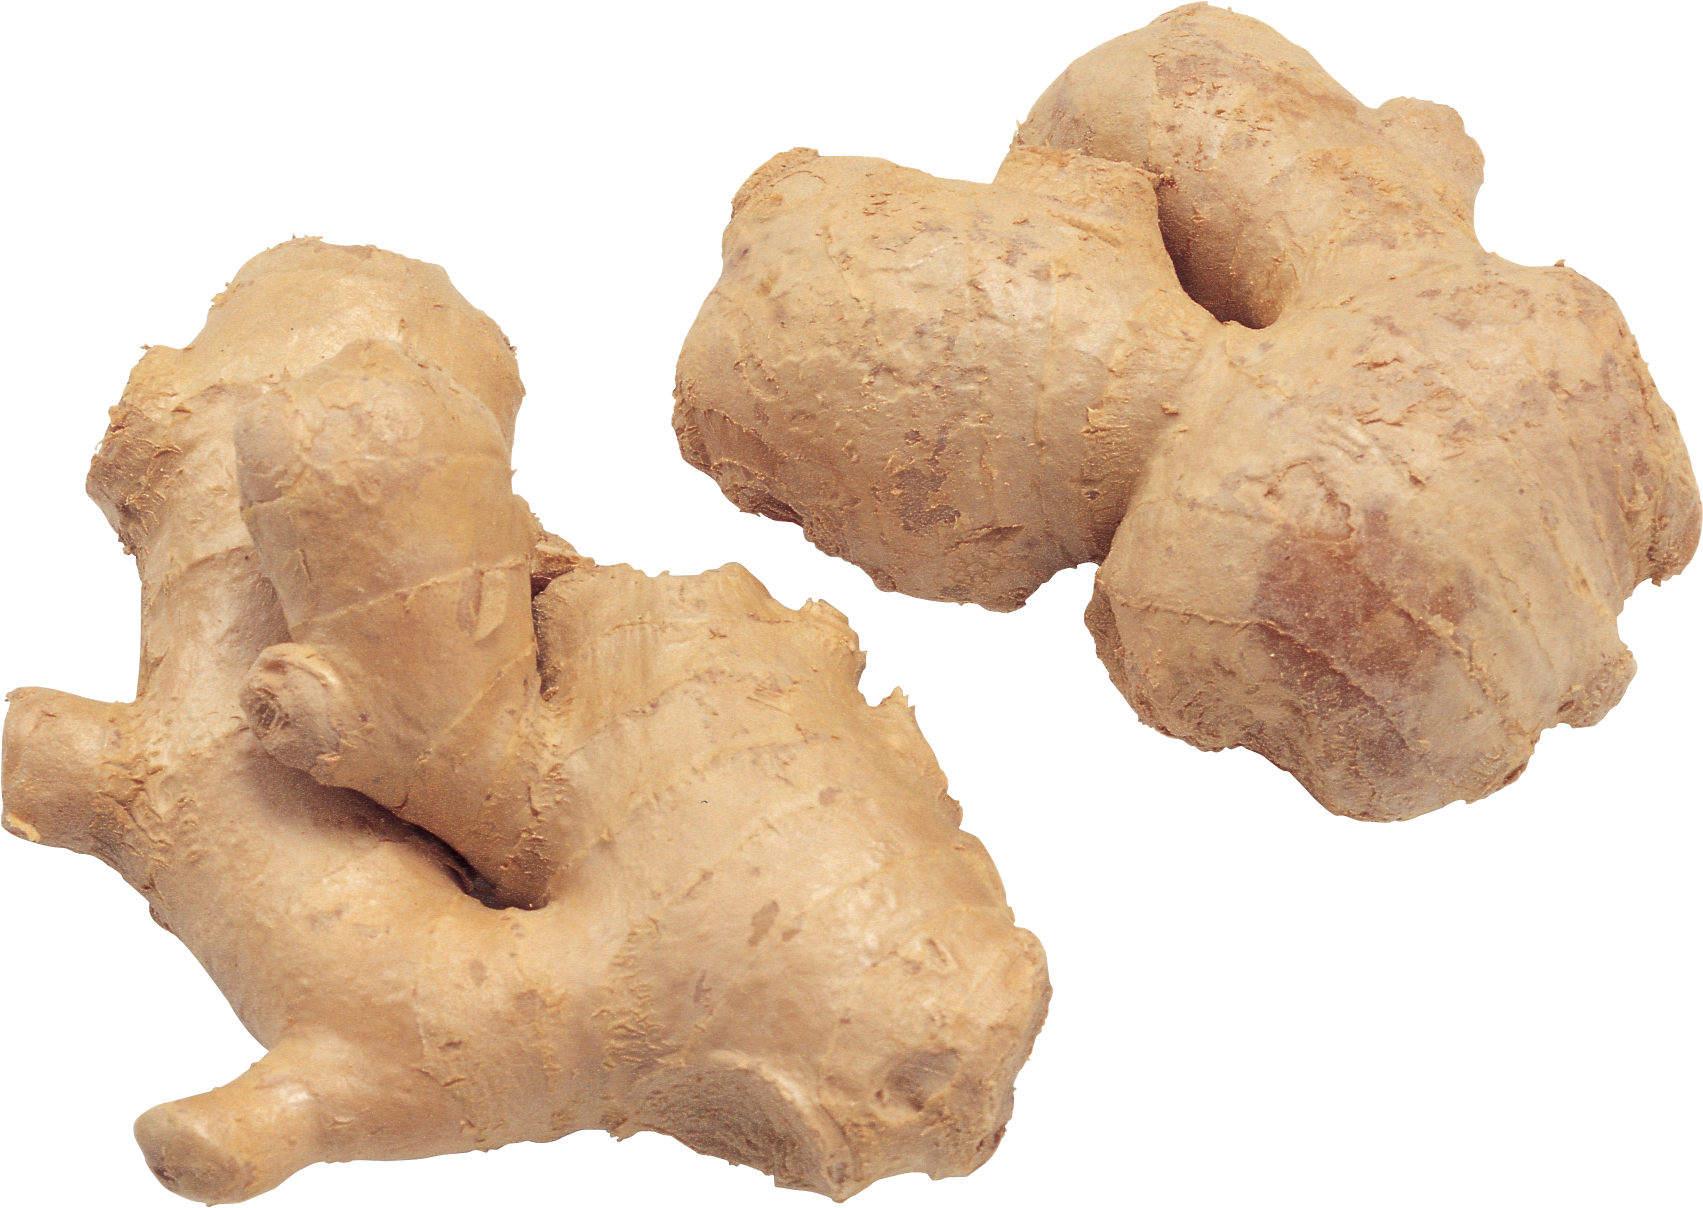 Fresh Ginger Roots PNG